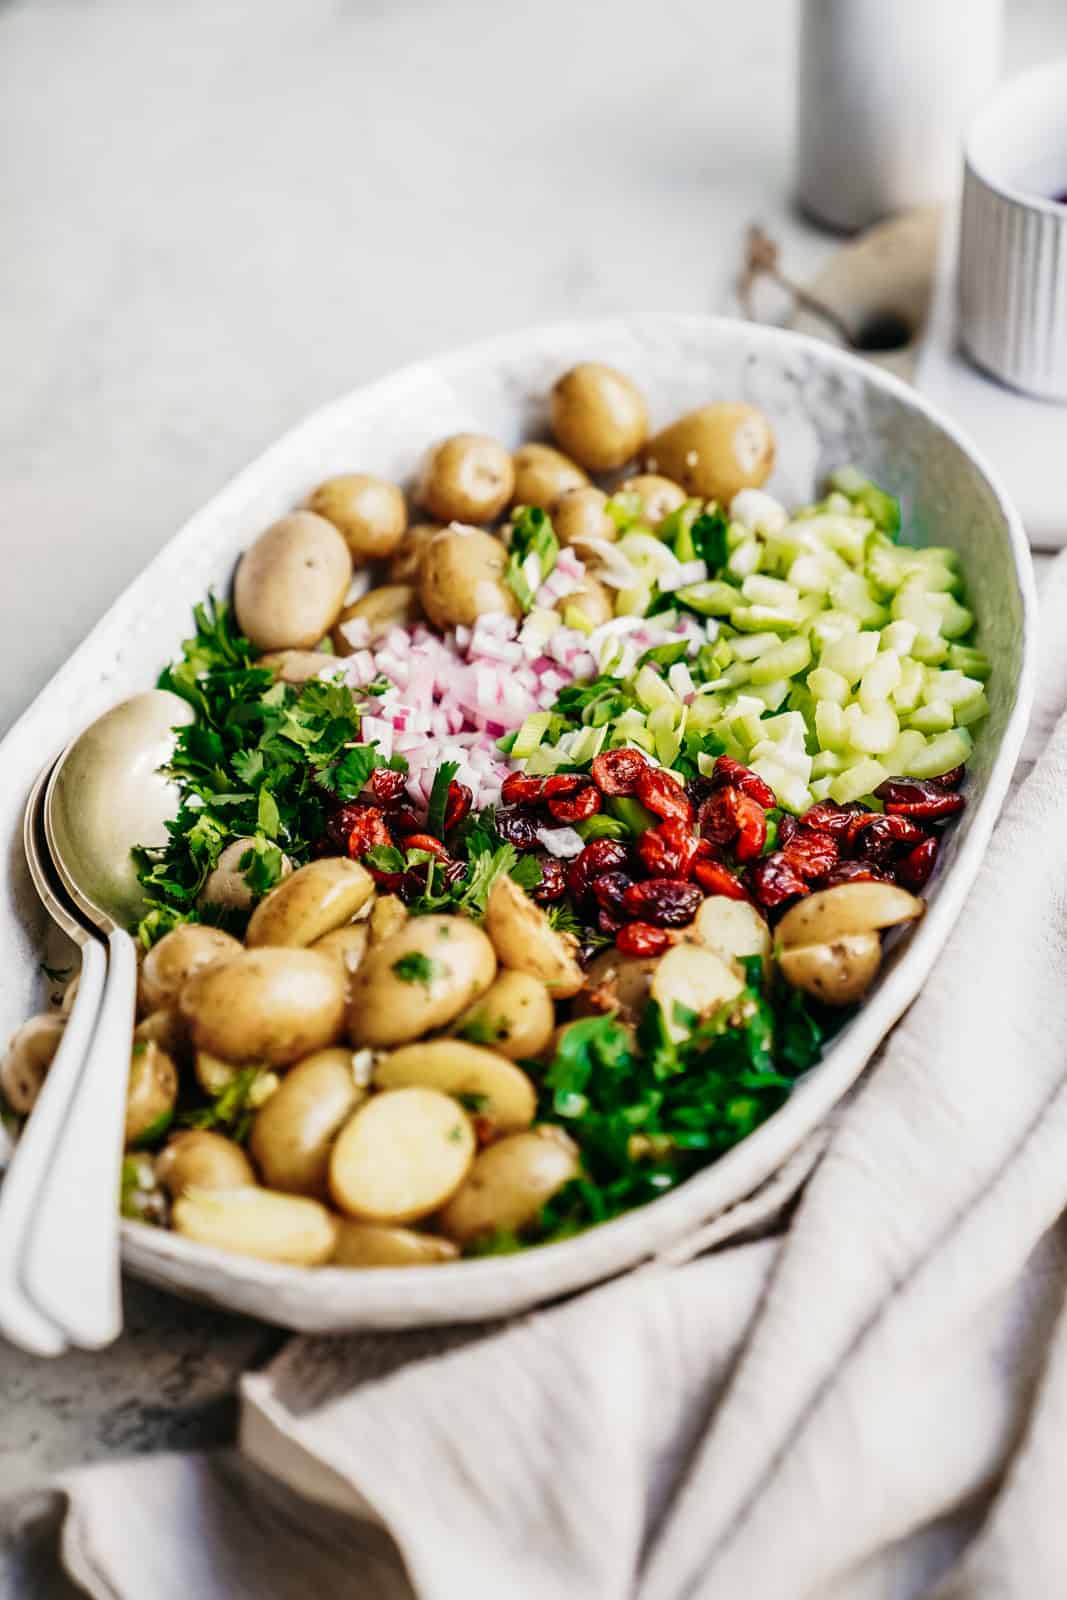 Big serving dish with beautiful and colourful Vegan Potato Salad Recipe ready to be served.